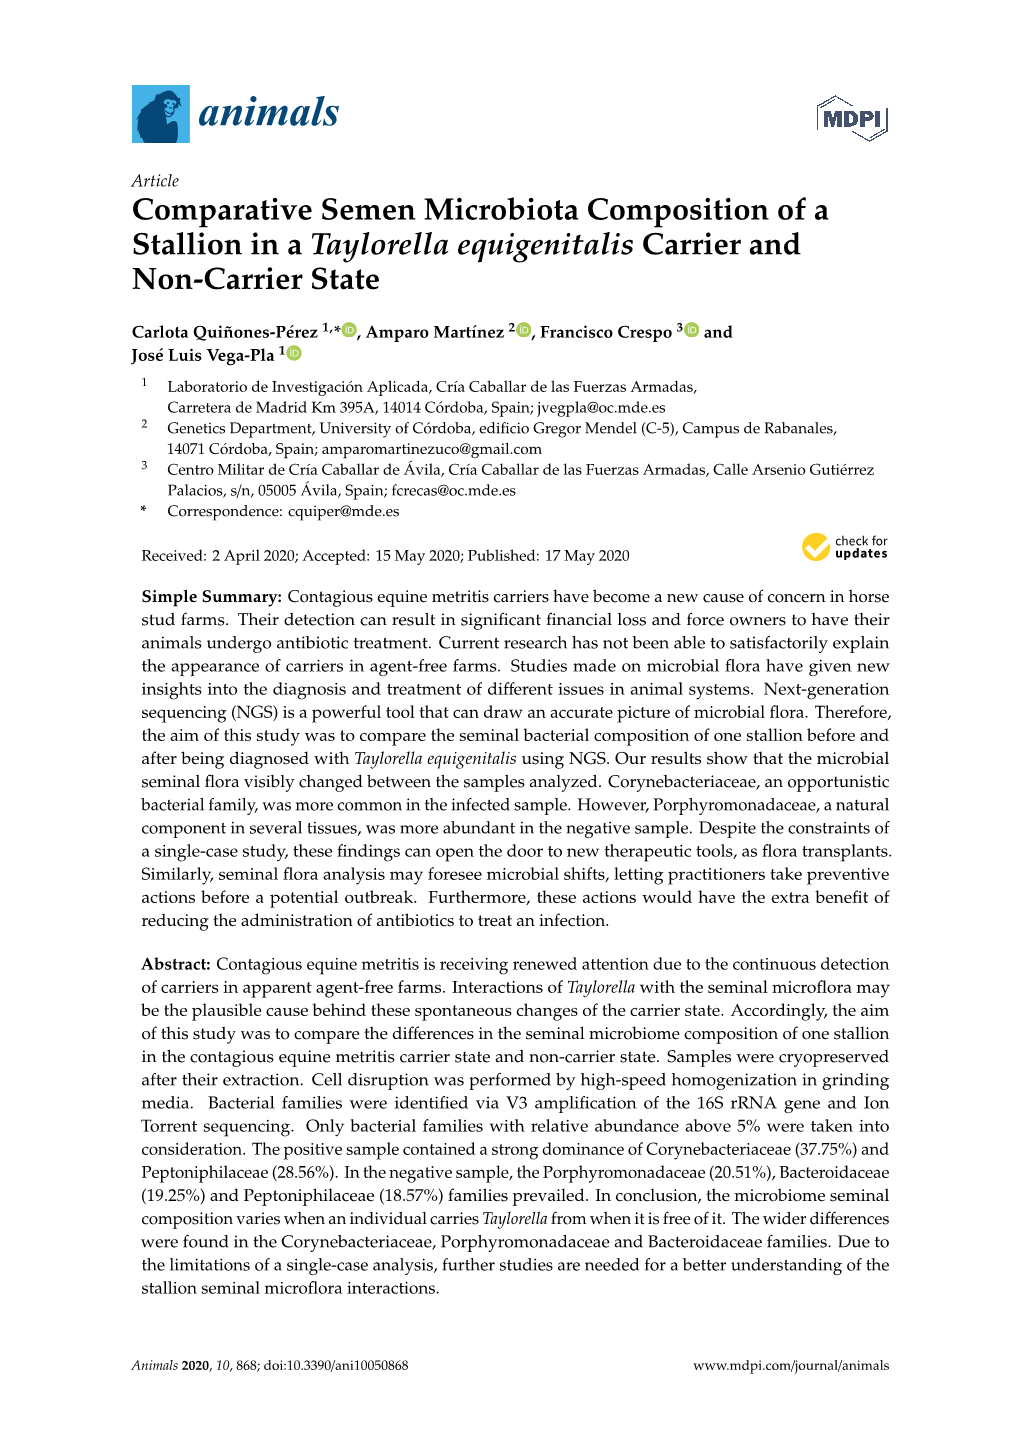 Comparative Semen Microbiota Composition of a Stallion in a Taylorella Equigenitalis Carrier and Non-Carrier State